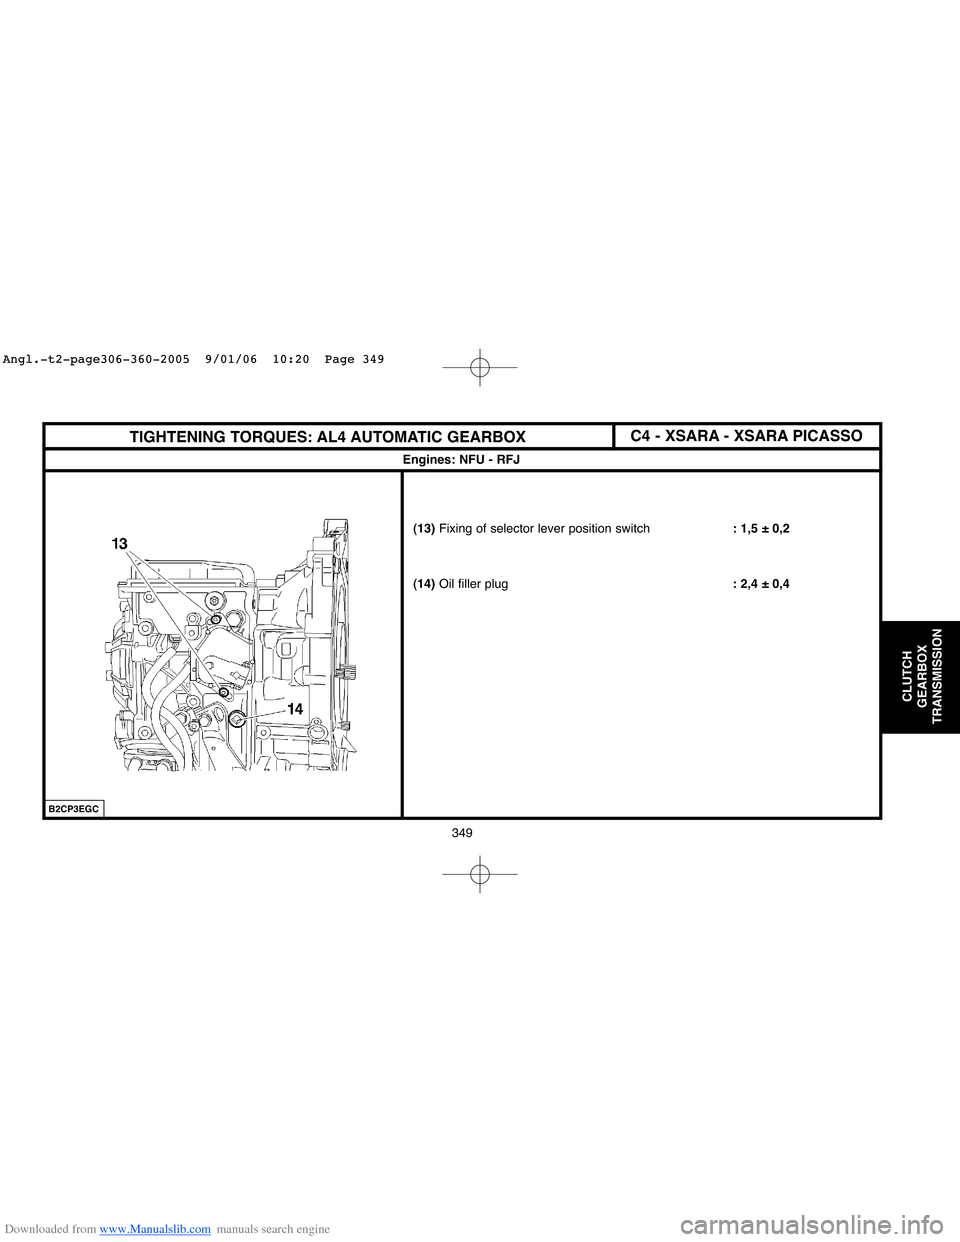 Citroen C4 2005 2.G Workshop Manual Downloaded from www.Manualslib.com manuals search engine 349
CLUTCH
GEARBOX
TRANSMISSION
Engines: NFU - RFJ
B2CP3EGC
(13)Fixing of selector lever position switch: 1,5 ± 0,2
(14)Oil filler plug: 2,4 �